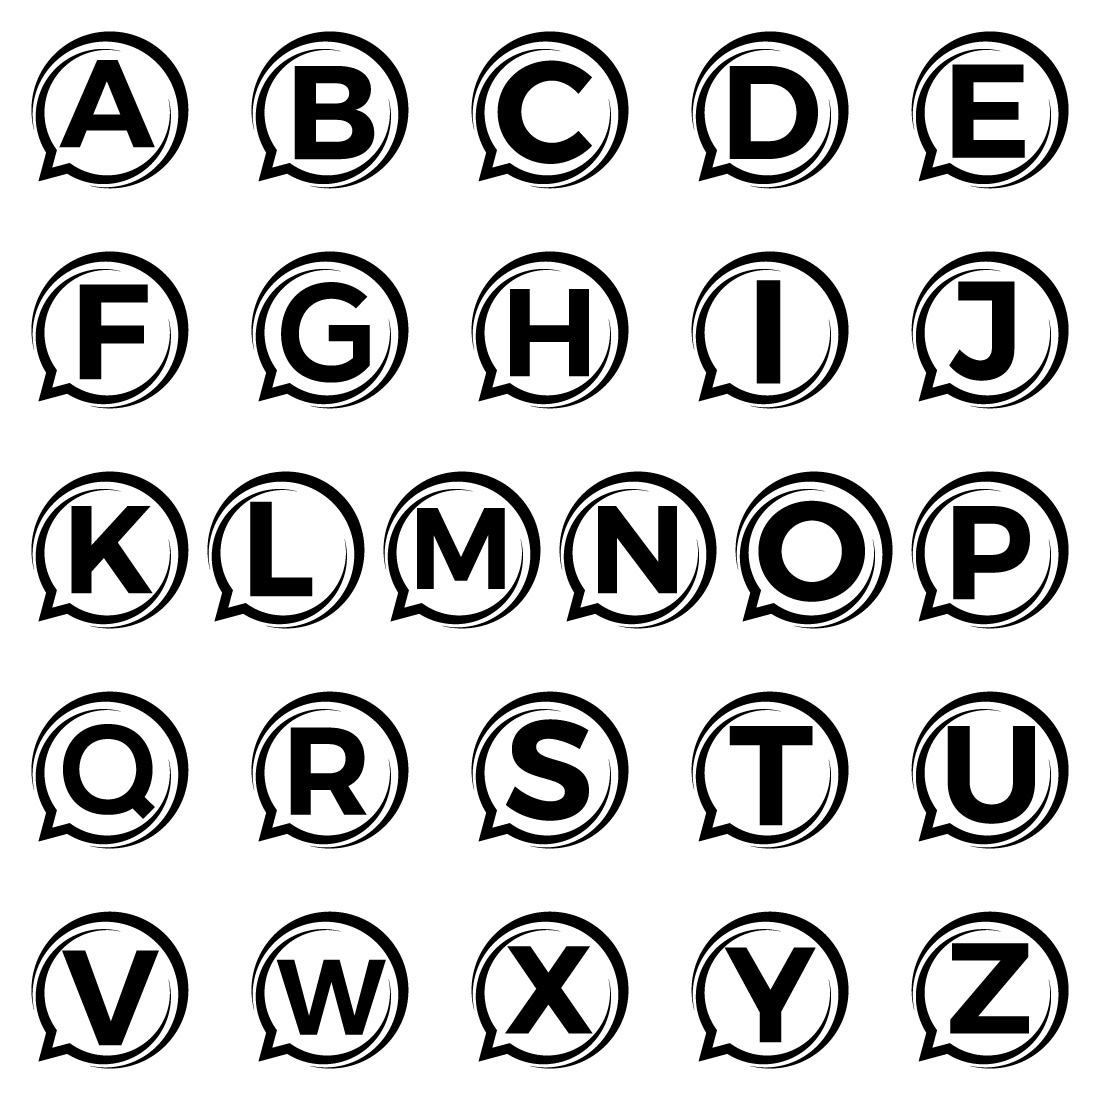 Initial A-Z monogram letter alphabet with a bubble chat icon. Talking chatting logo concept preview image.